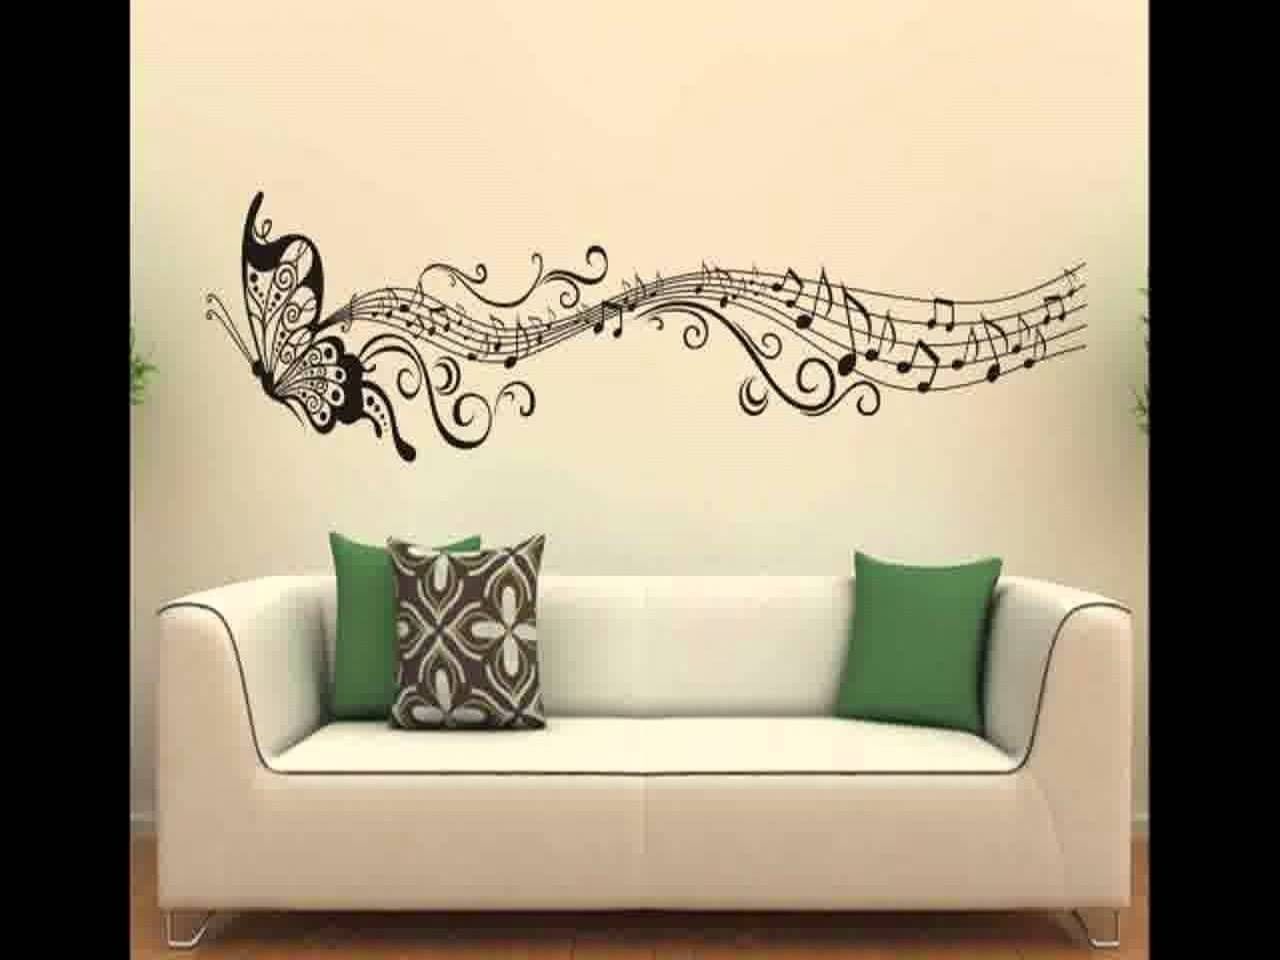 Acrylic Wall Art Design Ideas – Youtube Intended For Acrylic Wall Art (View 5 of 20)